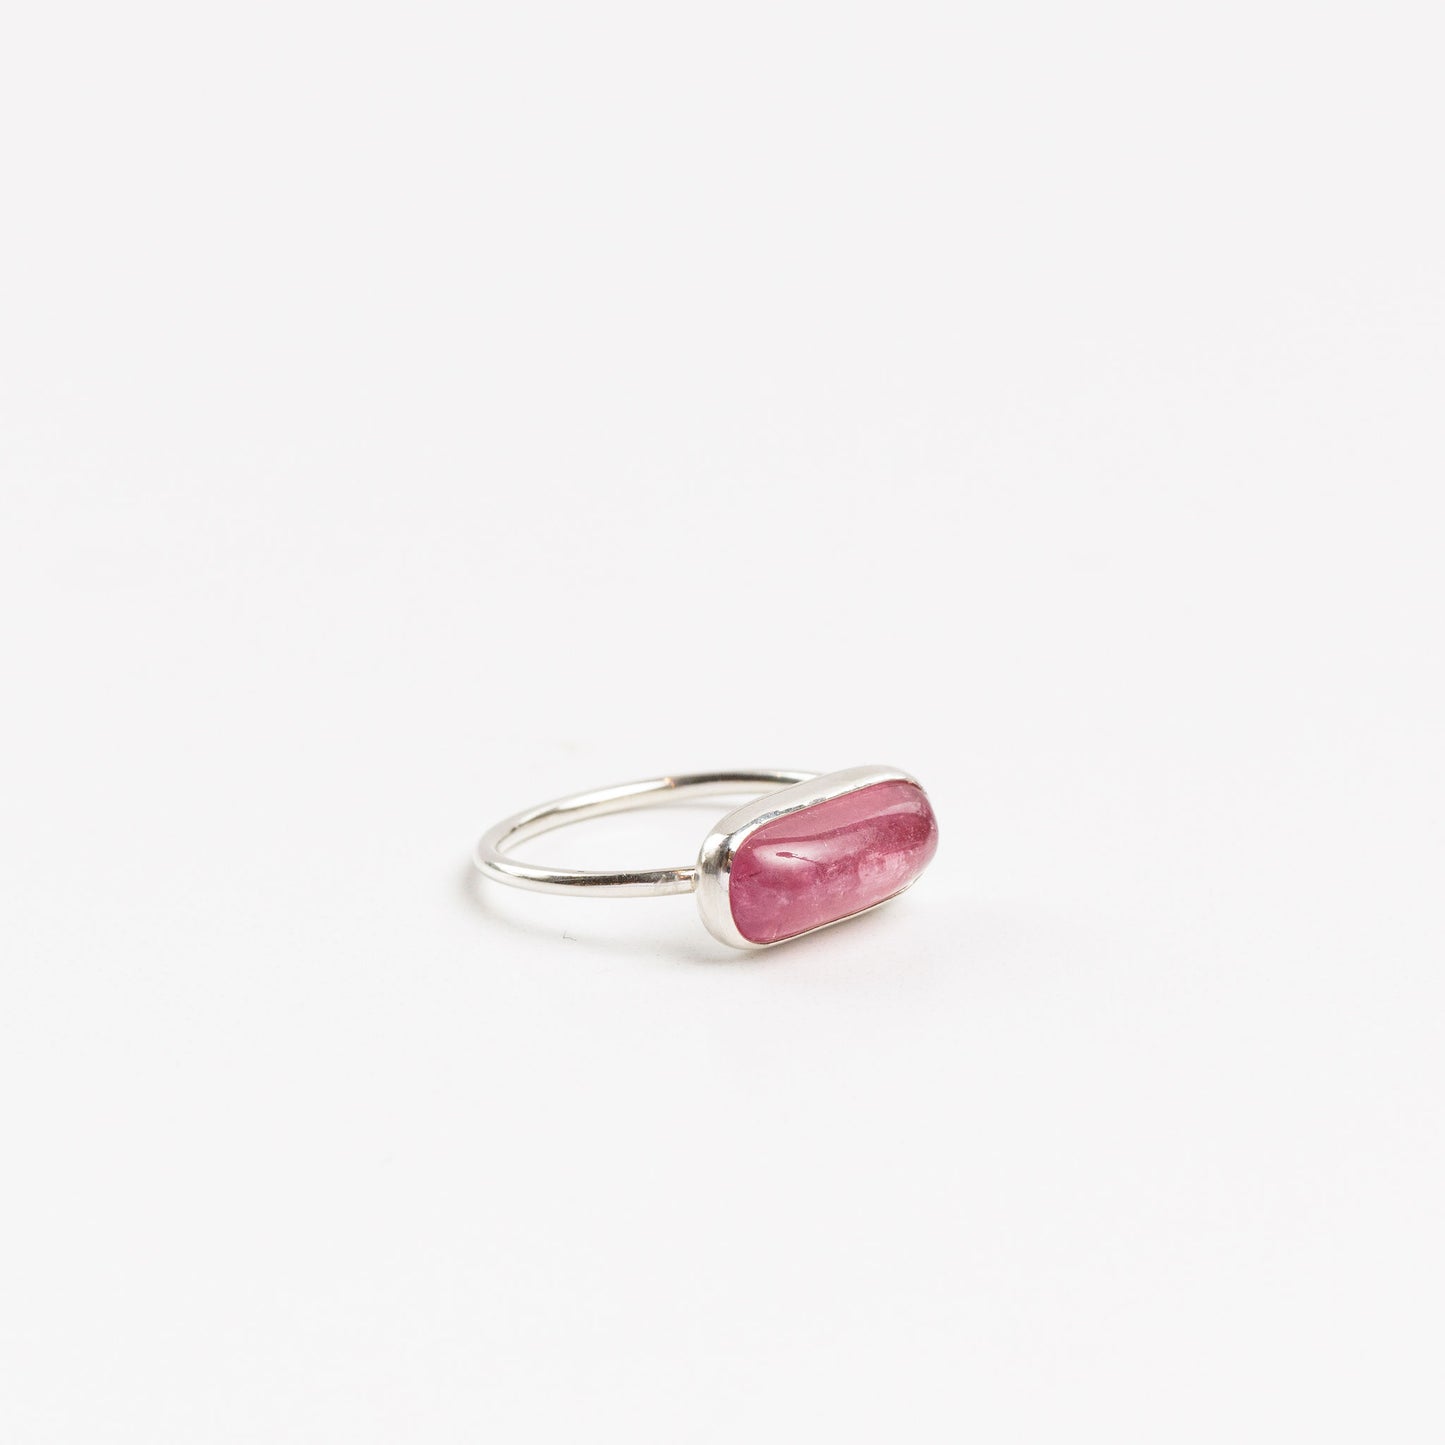 side view of the sterling silver pink tourmaline ring on a white backlground